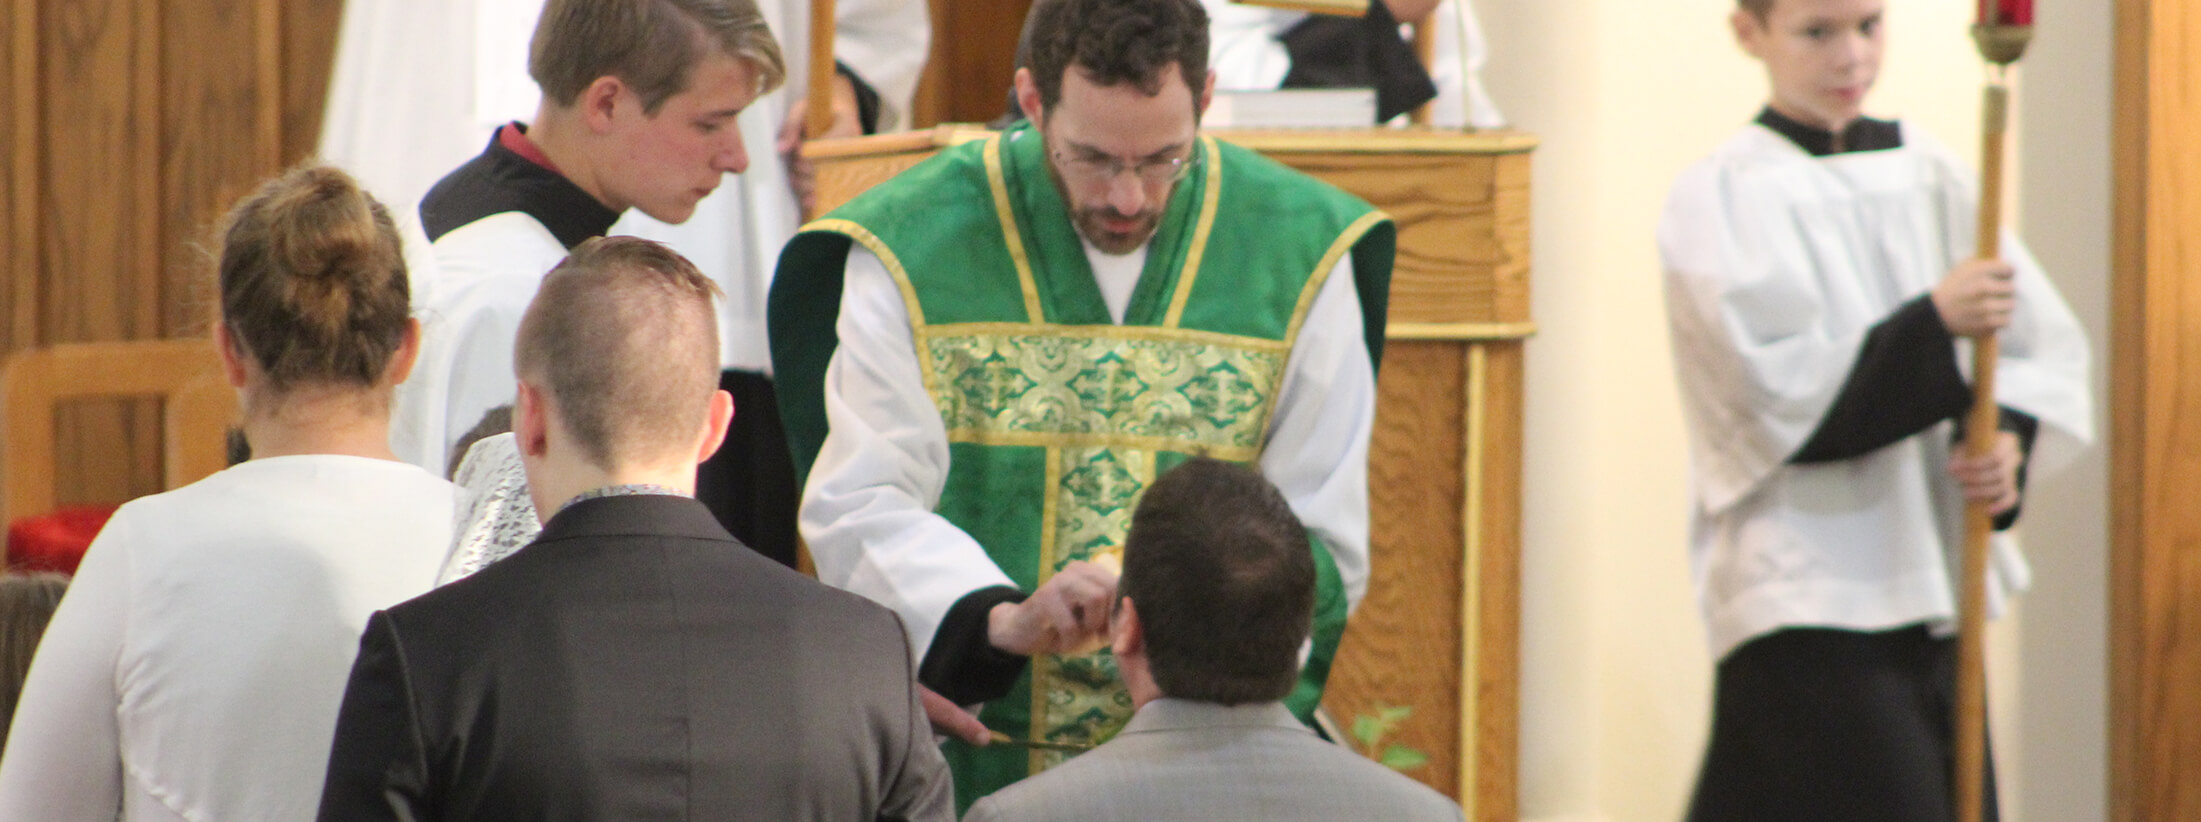 Father passing out holy communion